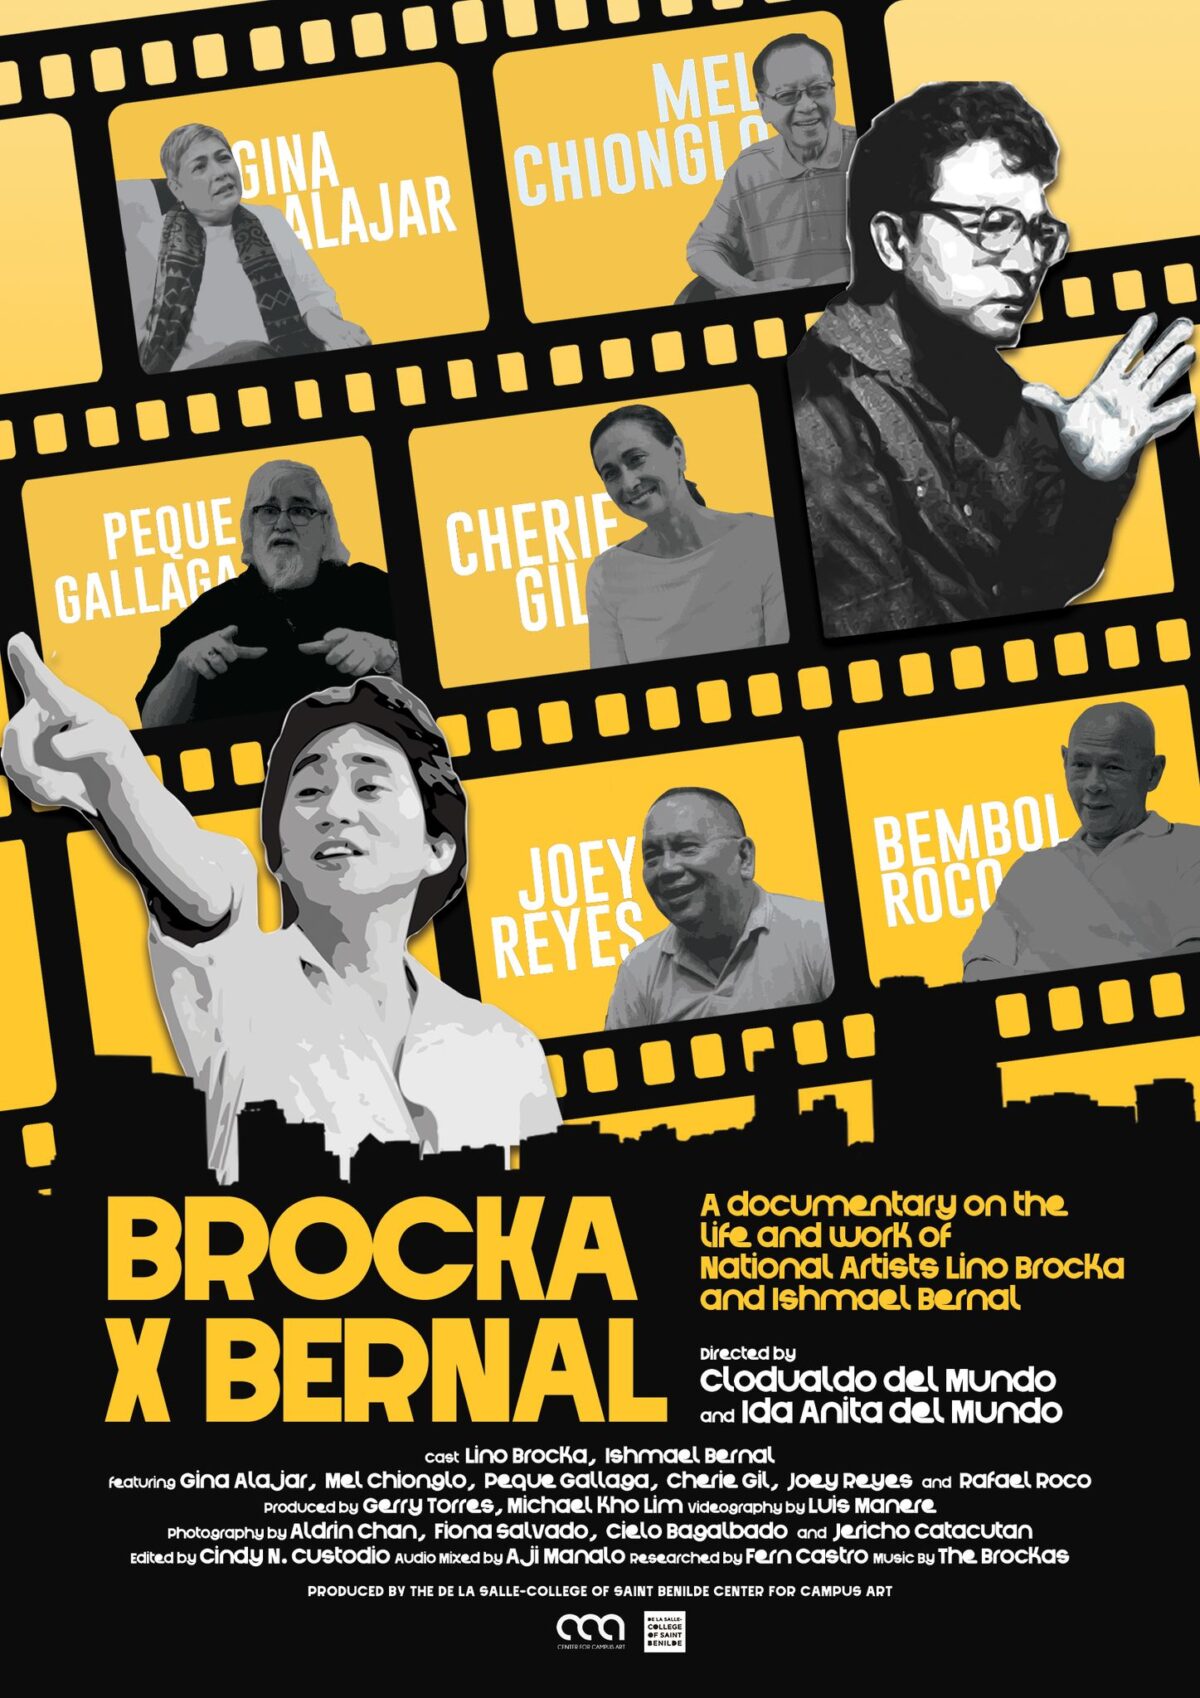 ‘Brocka X Bernal’ documentary to feature interviews from Cherie Gil, more